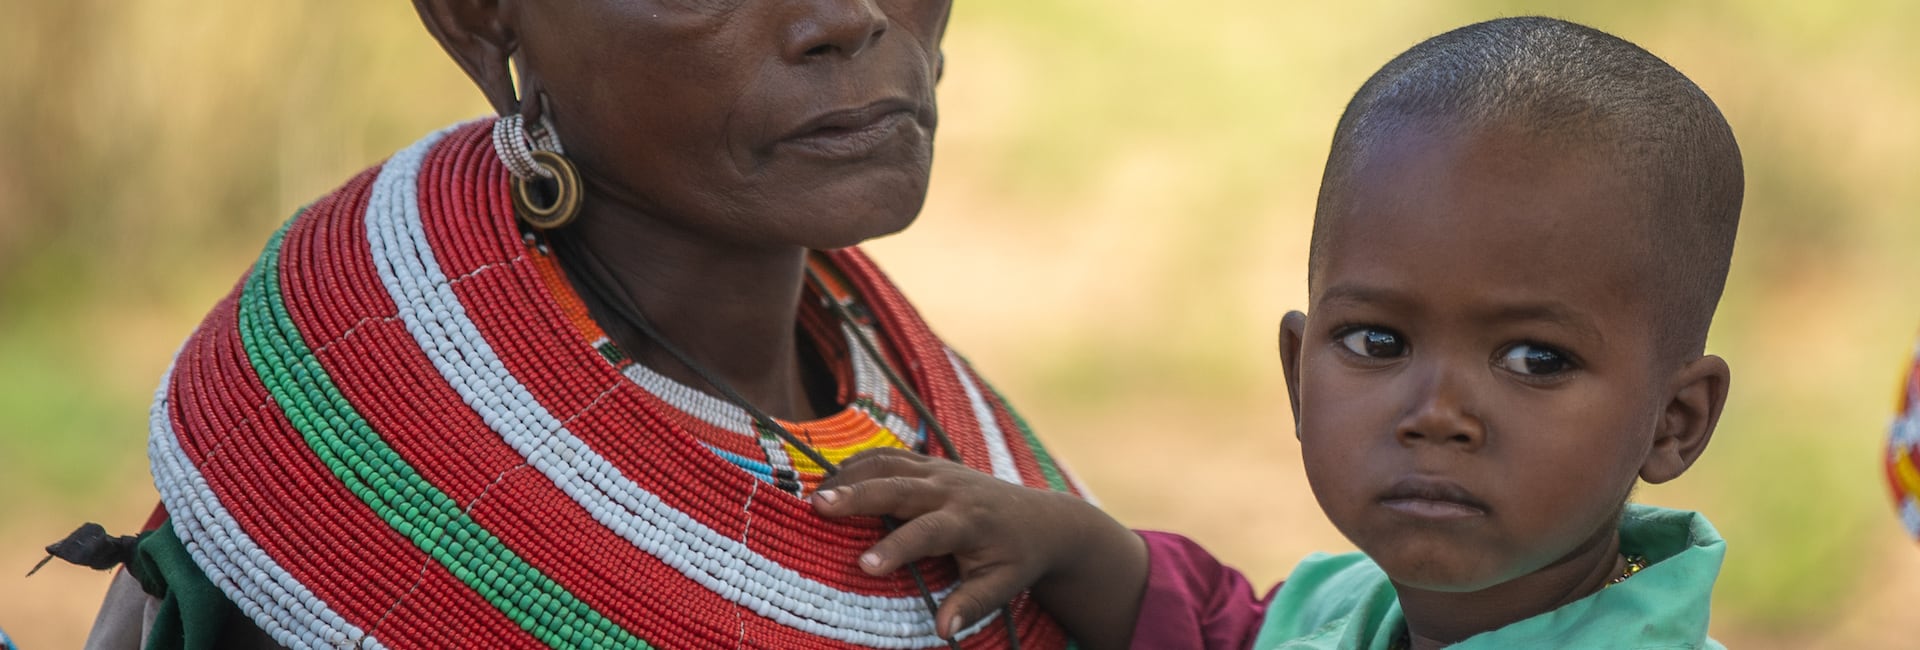 A woman and her child in Africa